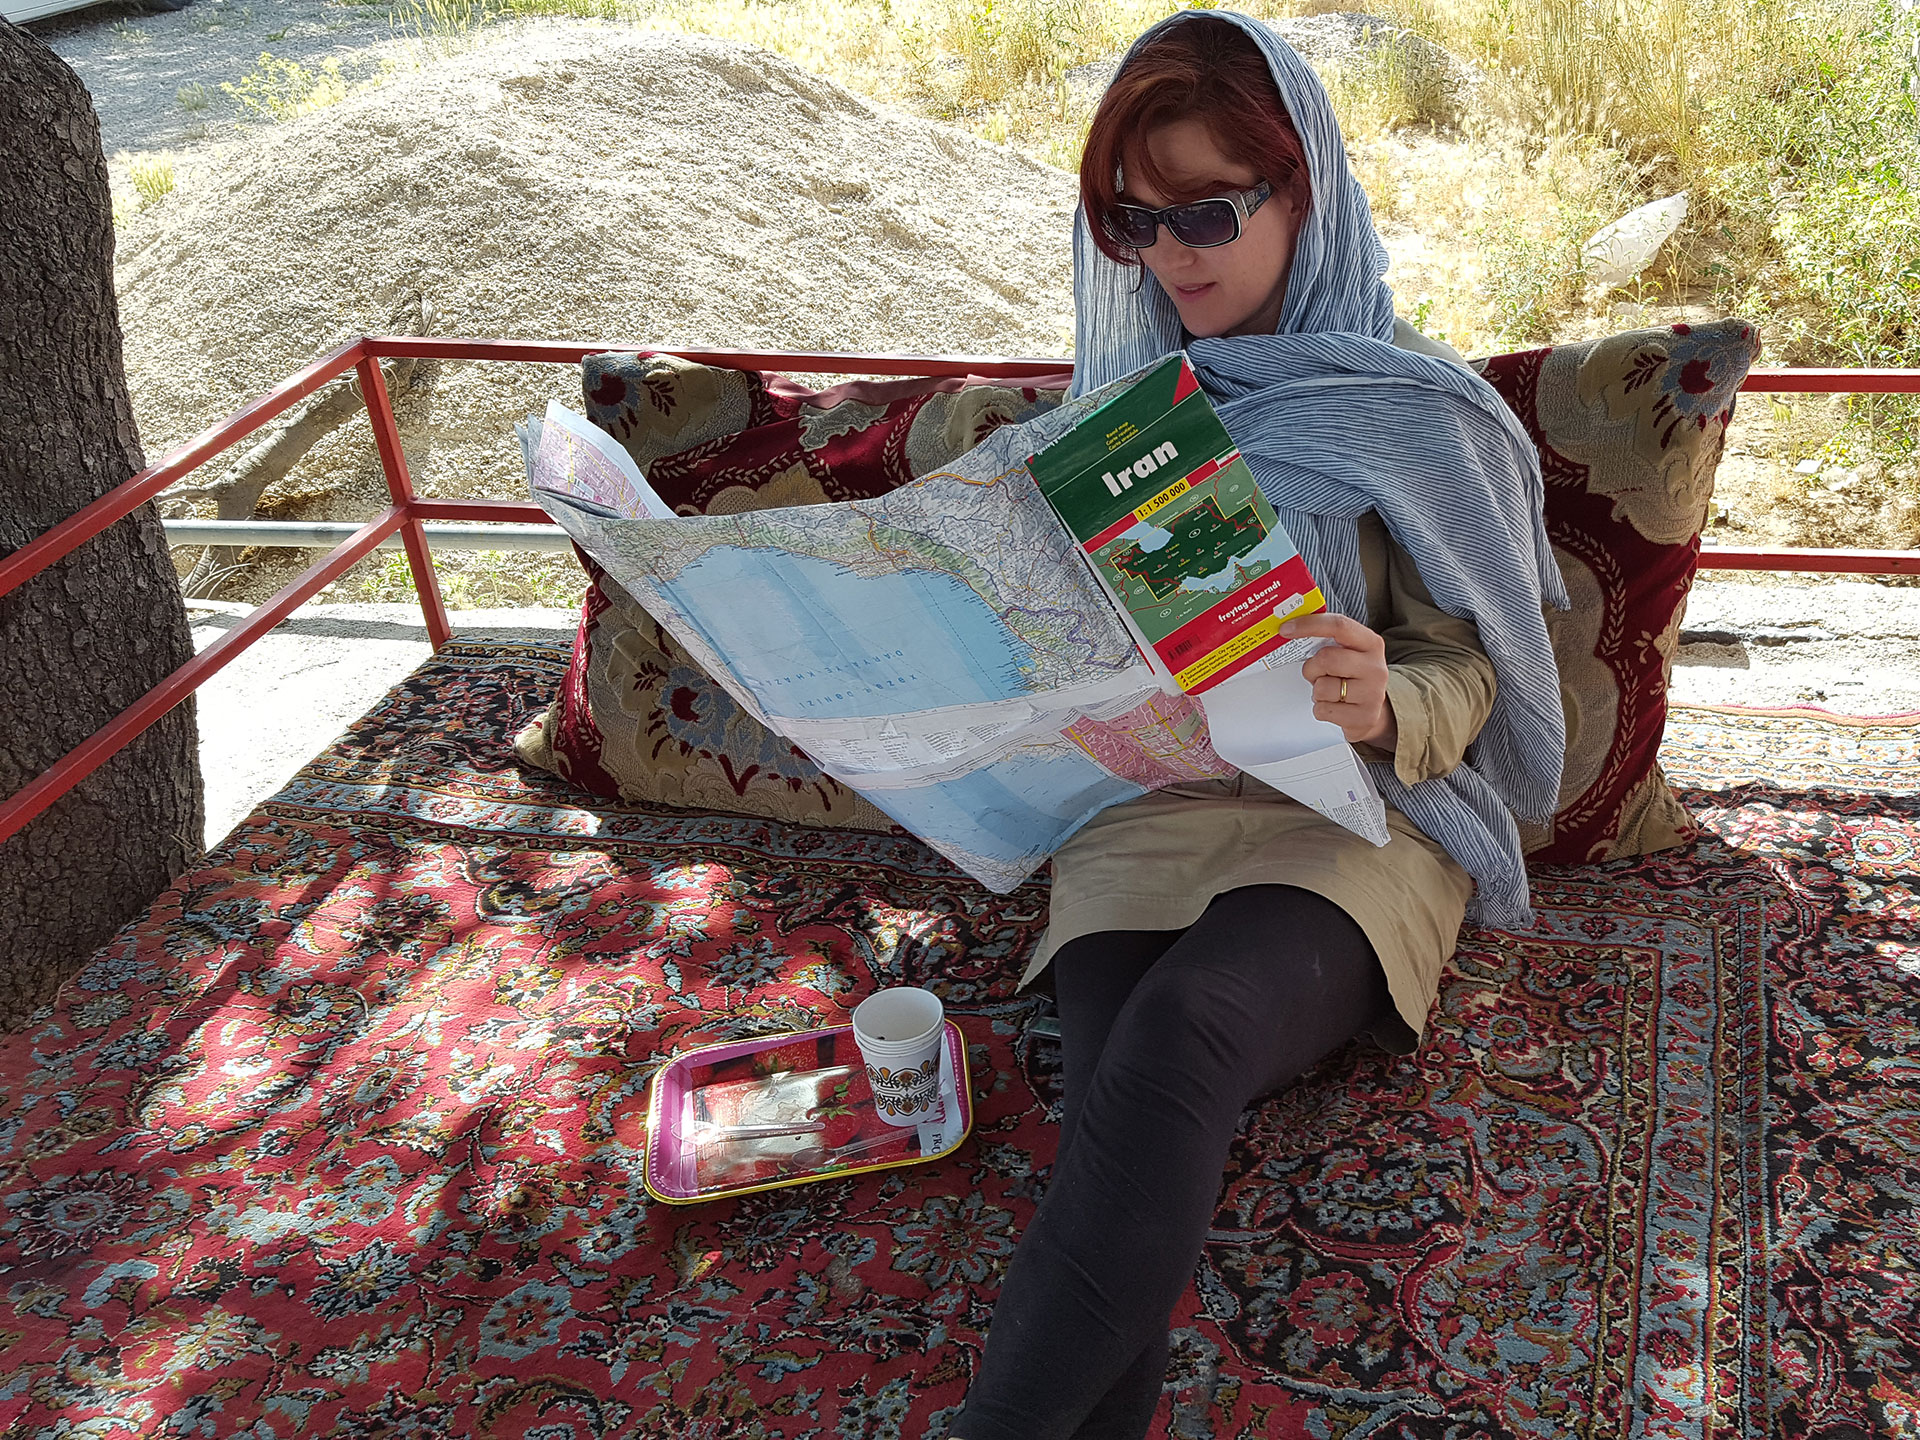 Lois Pryce reclining in the shade reading a map of Iran during her motorcycle adventure